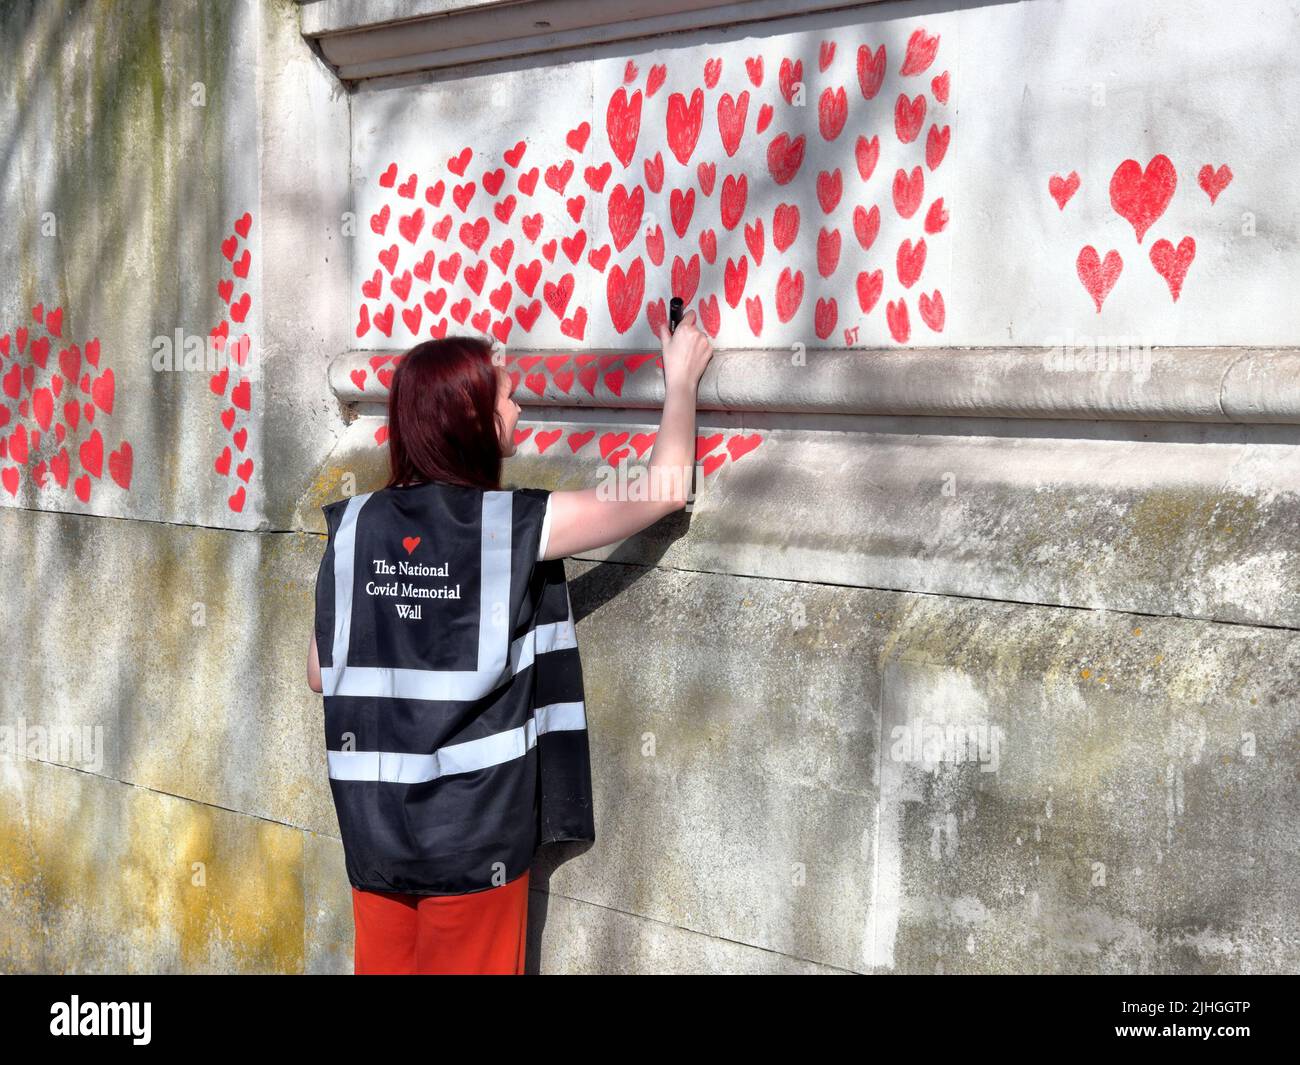 London, UK - March 30, 2021: The National Covid Memorial Wall, volunteers painting 150,000 red hearts to commemorate Covid-19 deaths Stock Photo